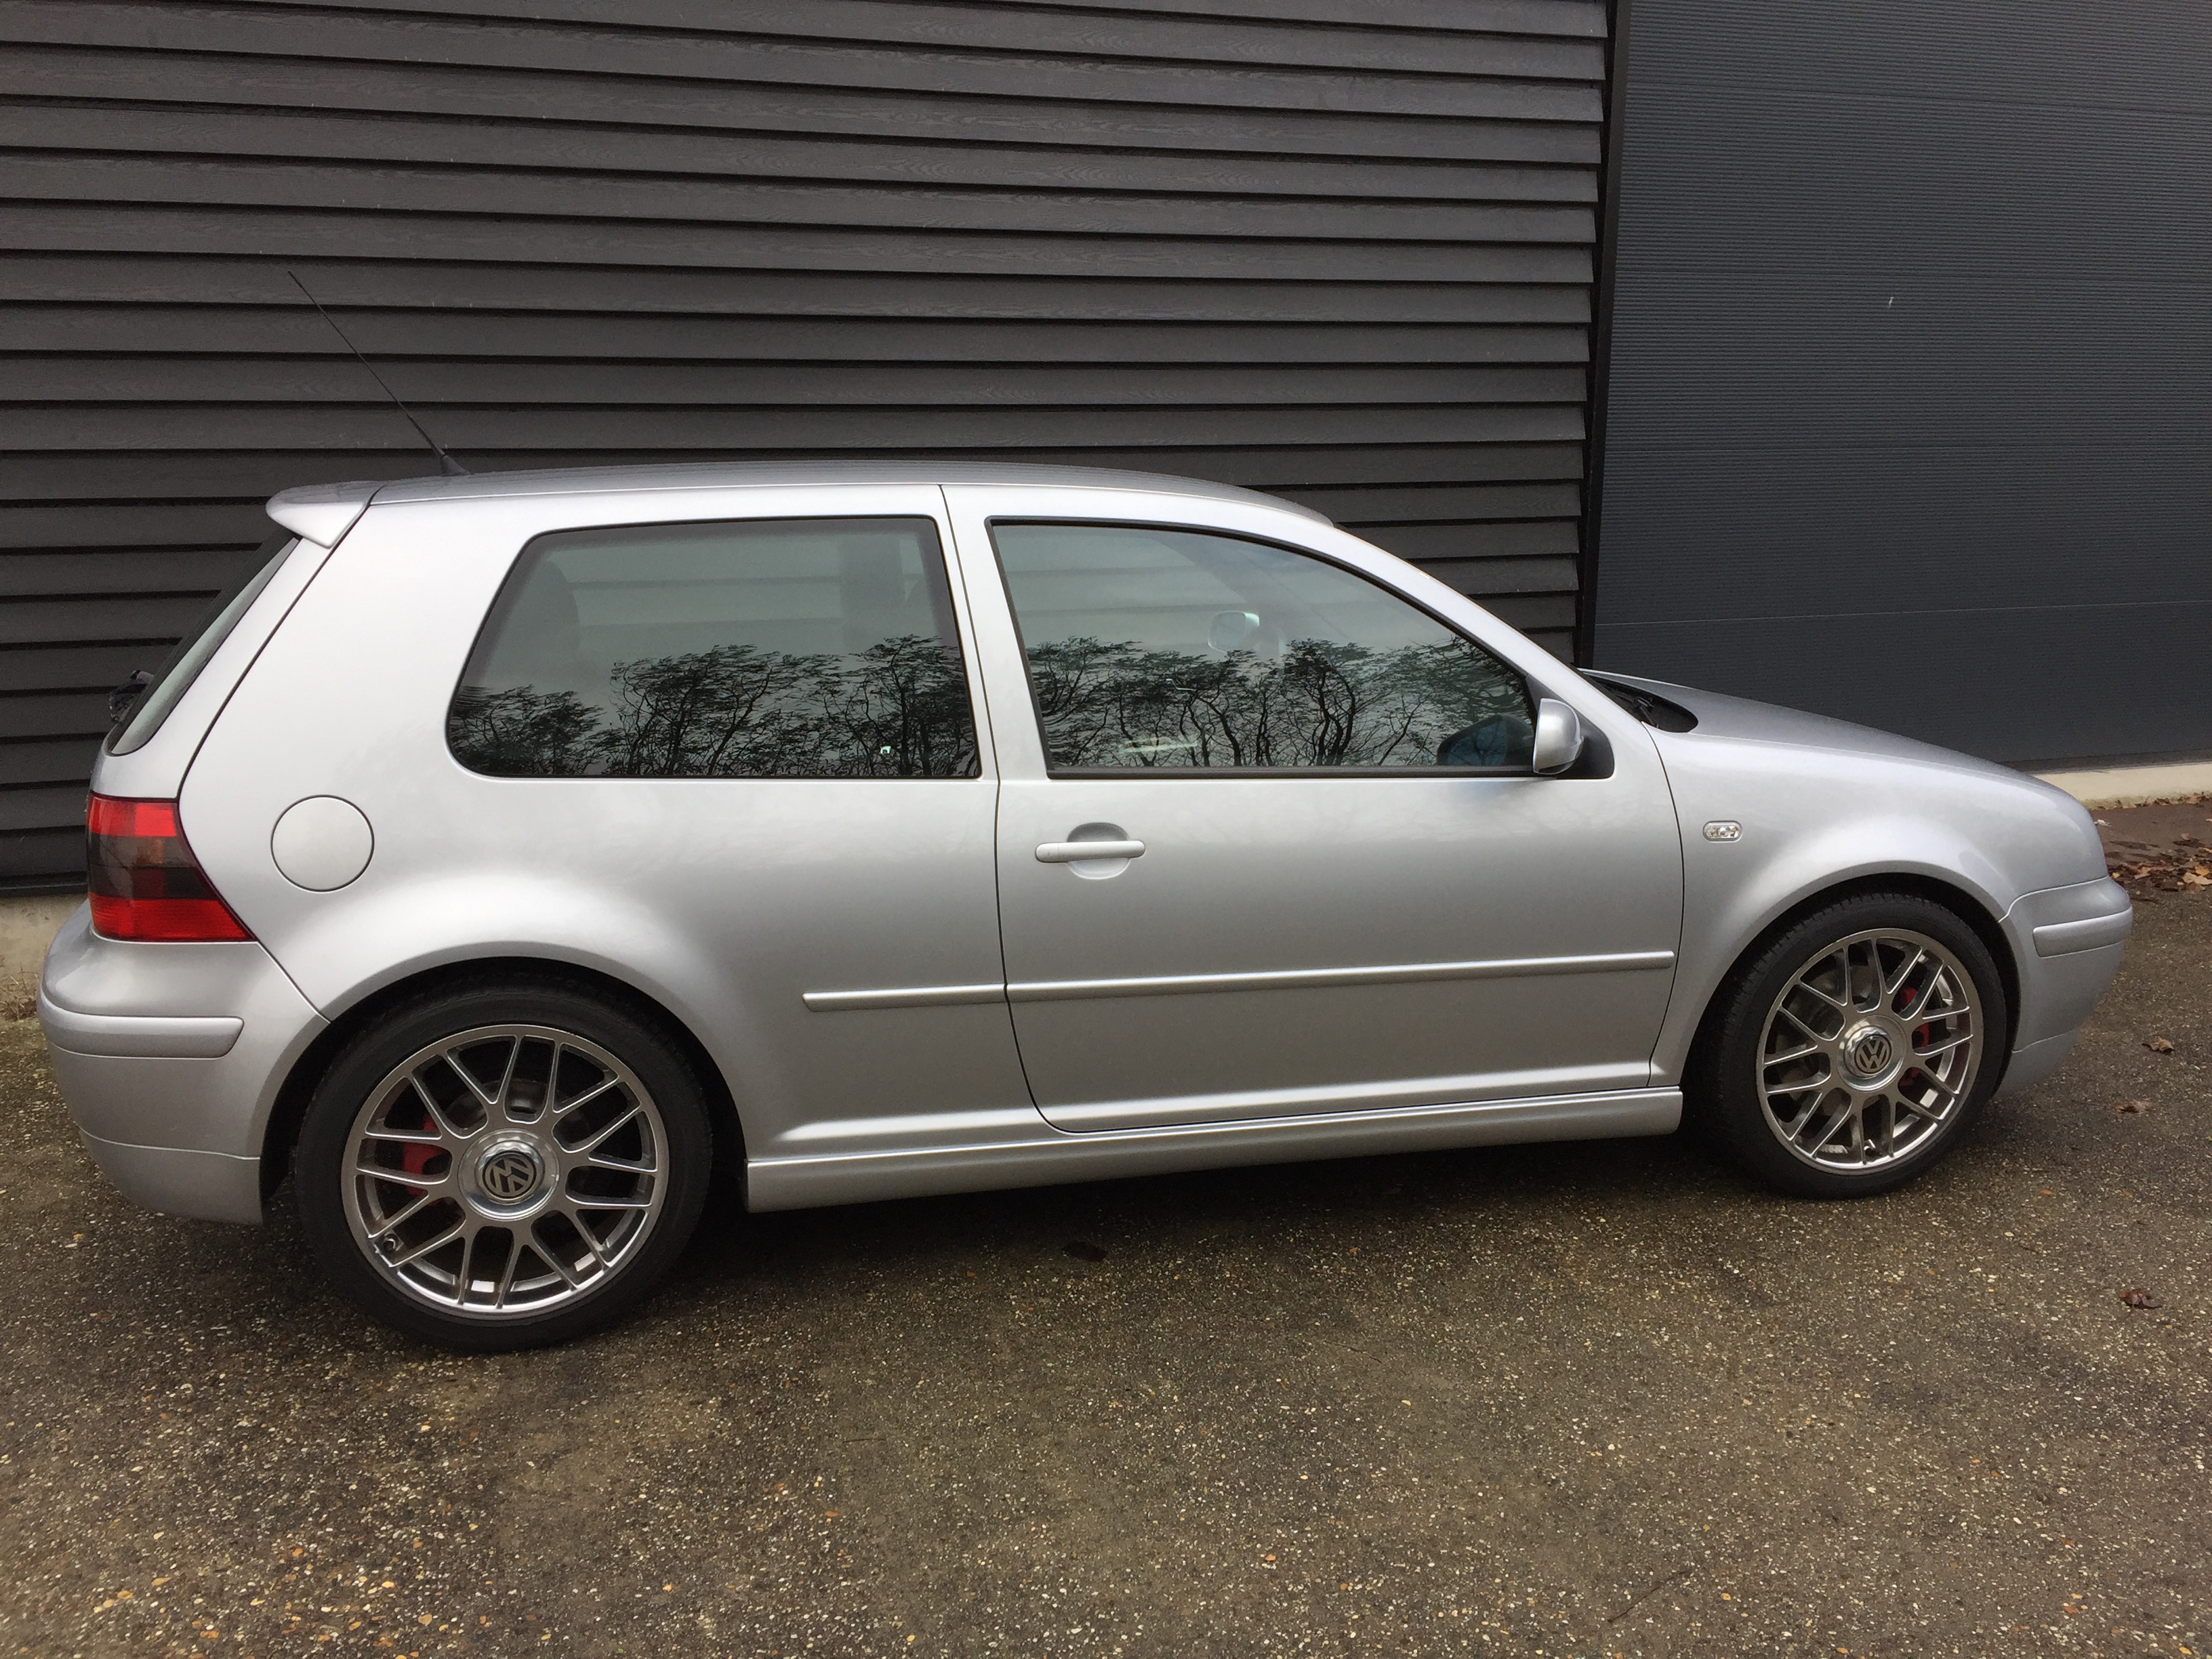 VW Golf IV GTI 1.8 Turbo Edition 25 Youngtimer